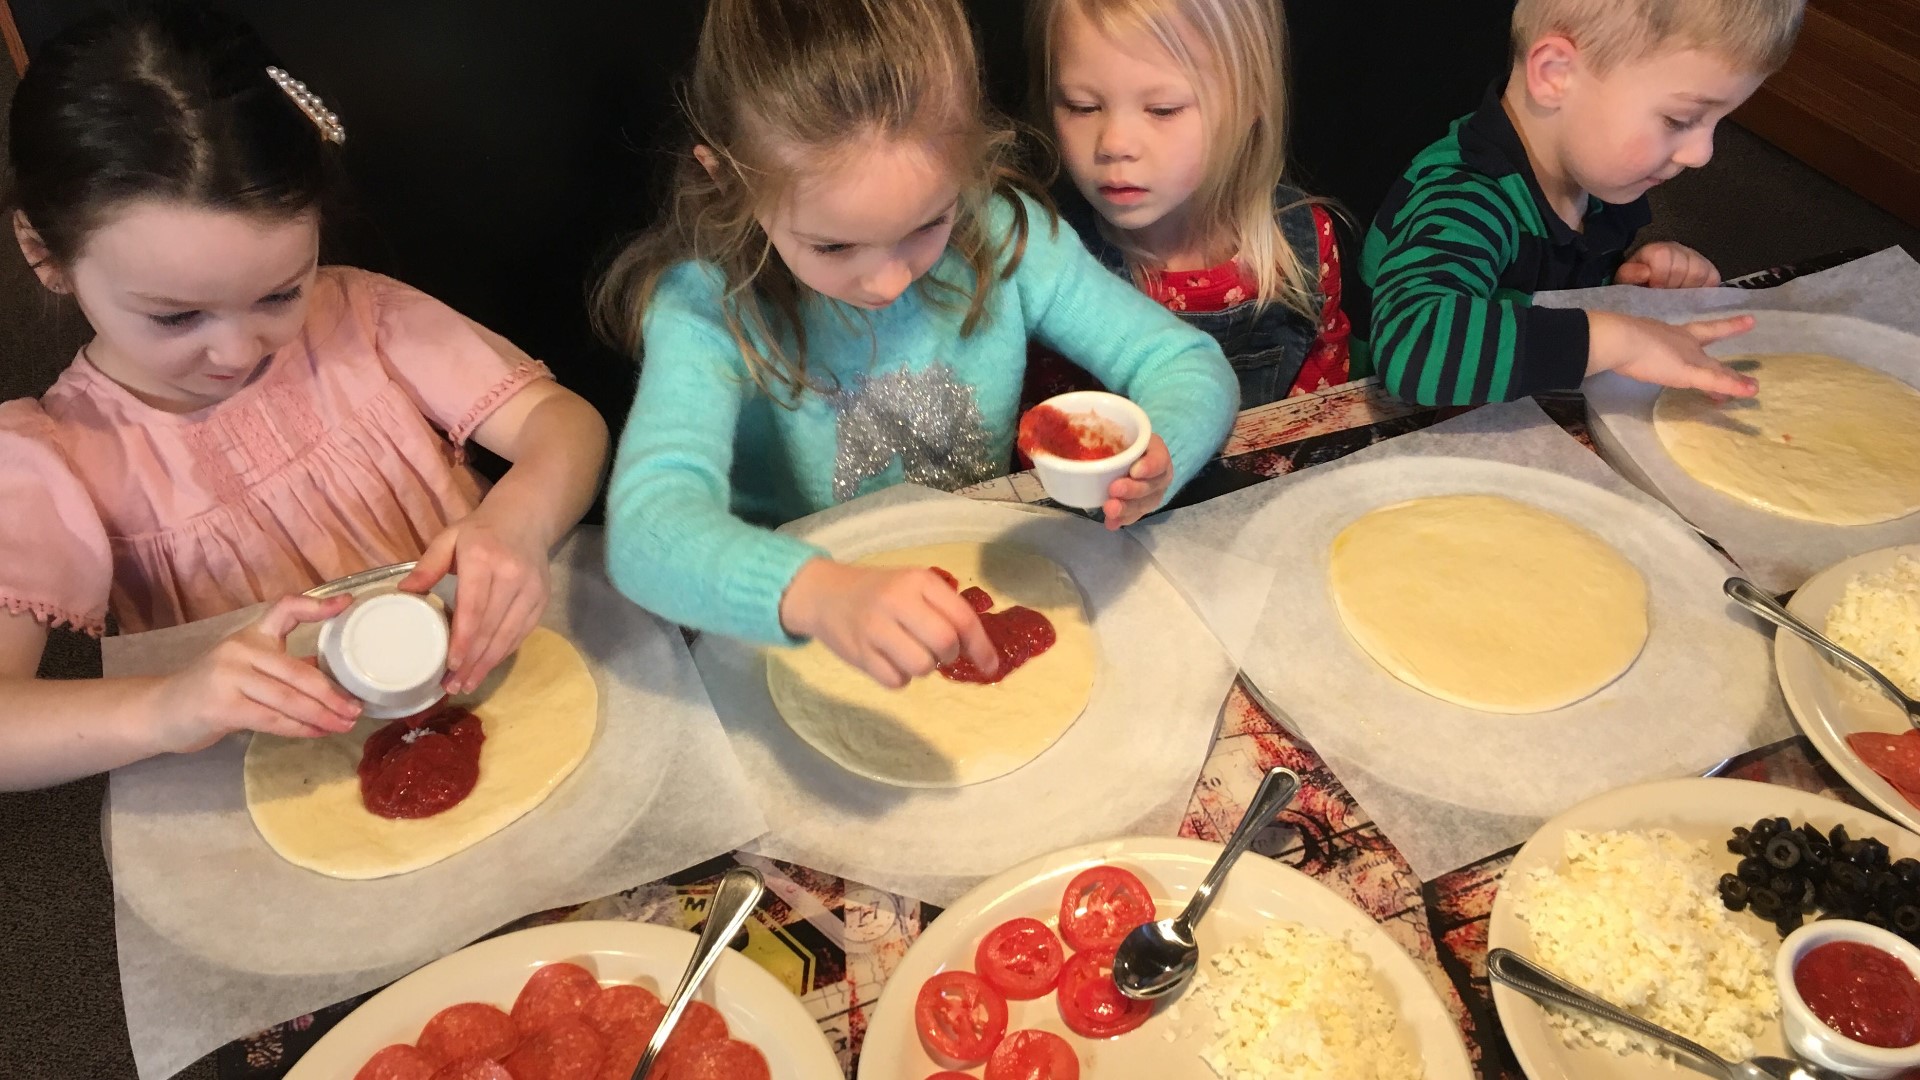 The Puyallup and Sumner pizzerias turn your children into chefs